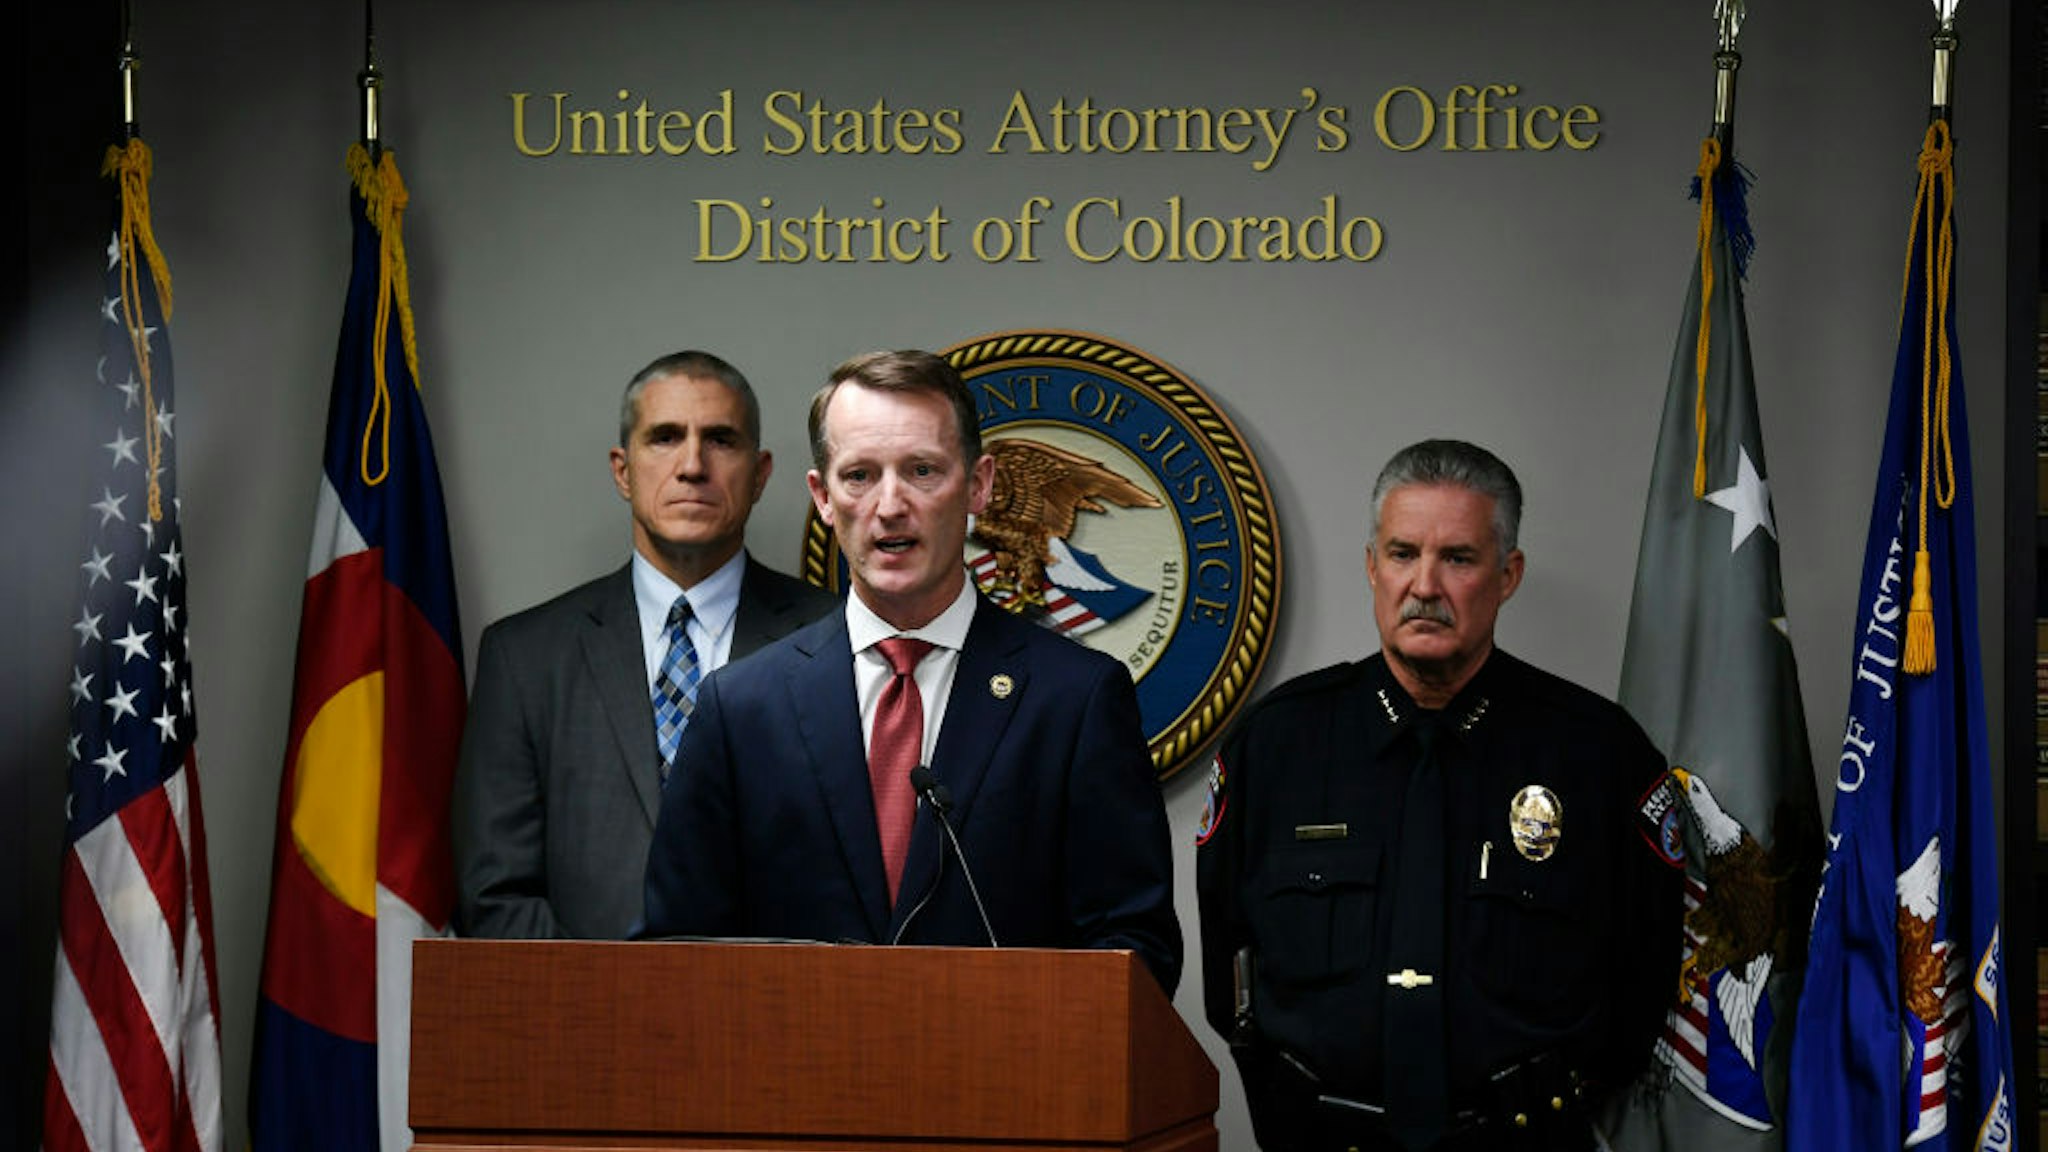 U.S. Attorney Jason R. Dunn, center, speaks during a press conference at U.S. Attorney's Office on November 4, 2019 in Denver, Colorado. The FBI announced that they arrested Richard Holzer on domestic terrorism charges for his plot to blow up Temple Emanuel Synagogue in Pueblo. The 27-year-old Pueblo man, who hoped to incite a racial holy war and plotted ways he could destroy the second-oldest synagogue in Colorado to “get that place off the map,” is accused of domestic terrorism and a hate crime by federal authorities. With Dunn at the podium are Dean Phillips, FBI Denver Division Special Agent in Charge, left, and Troy Davenport, right, Pueblo Police Chief.